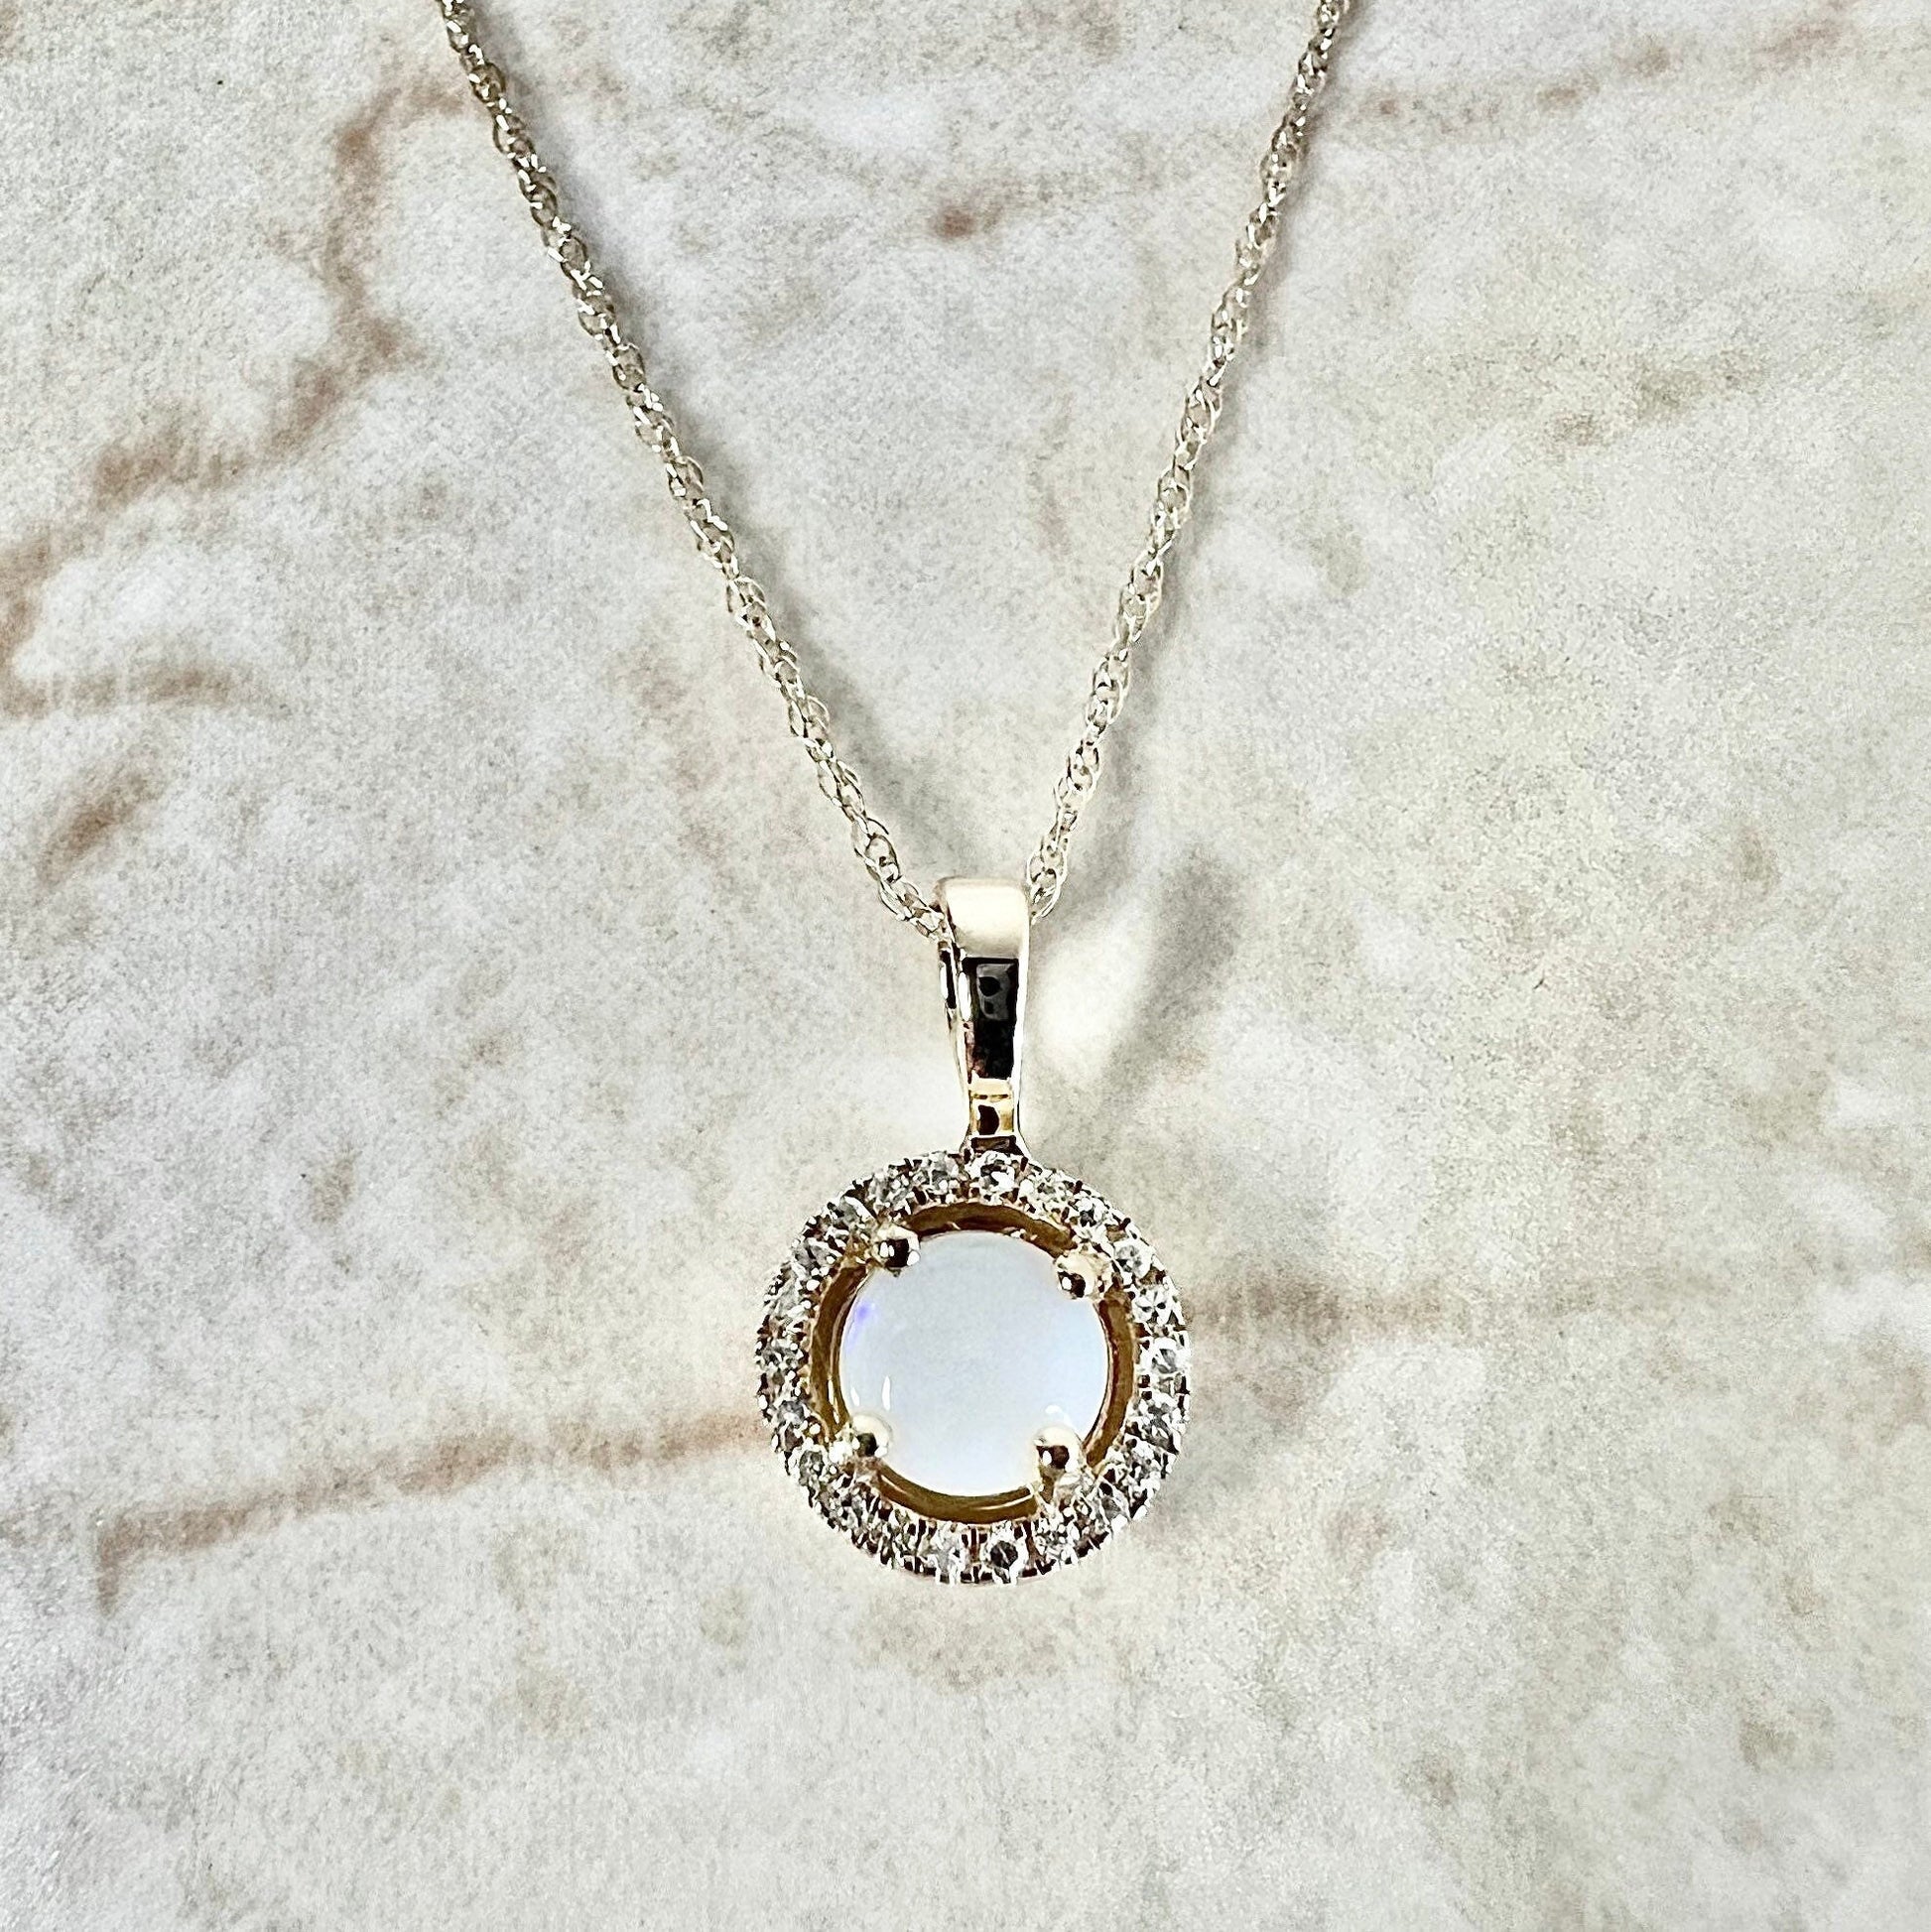 14K Round Opal Halo Pendant Necklace - Yellow Gold Opal Necklace - Opal Halo Necklace -Opal Pendant-October Birthstone-Birthday Gift For Her